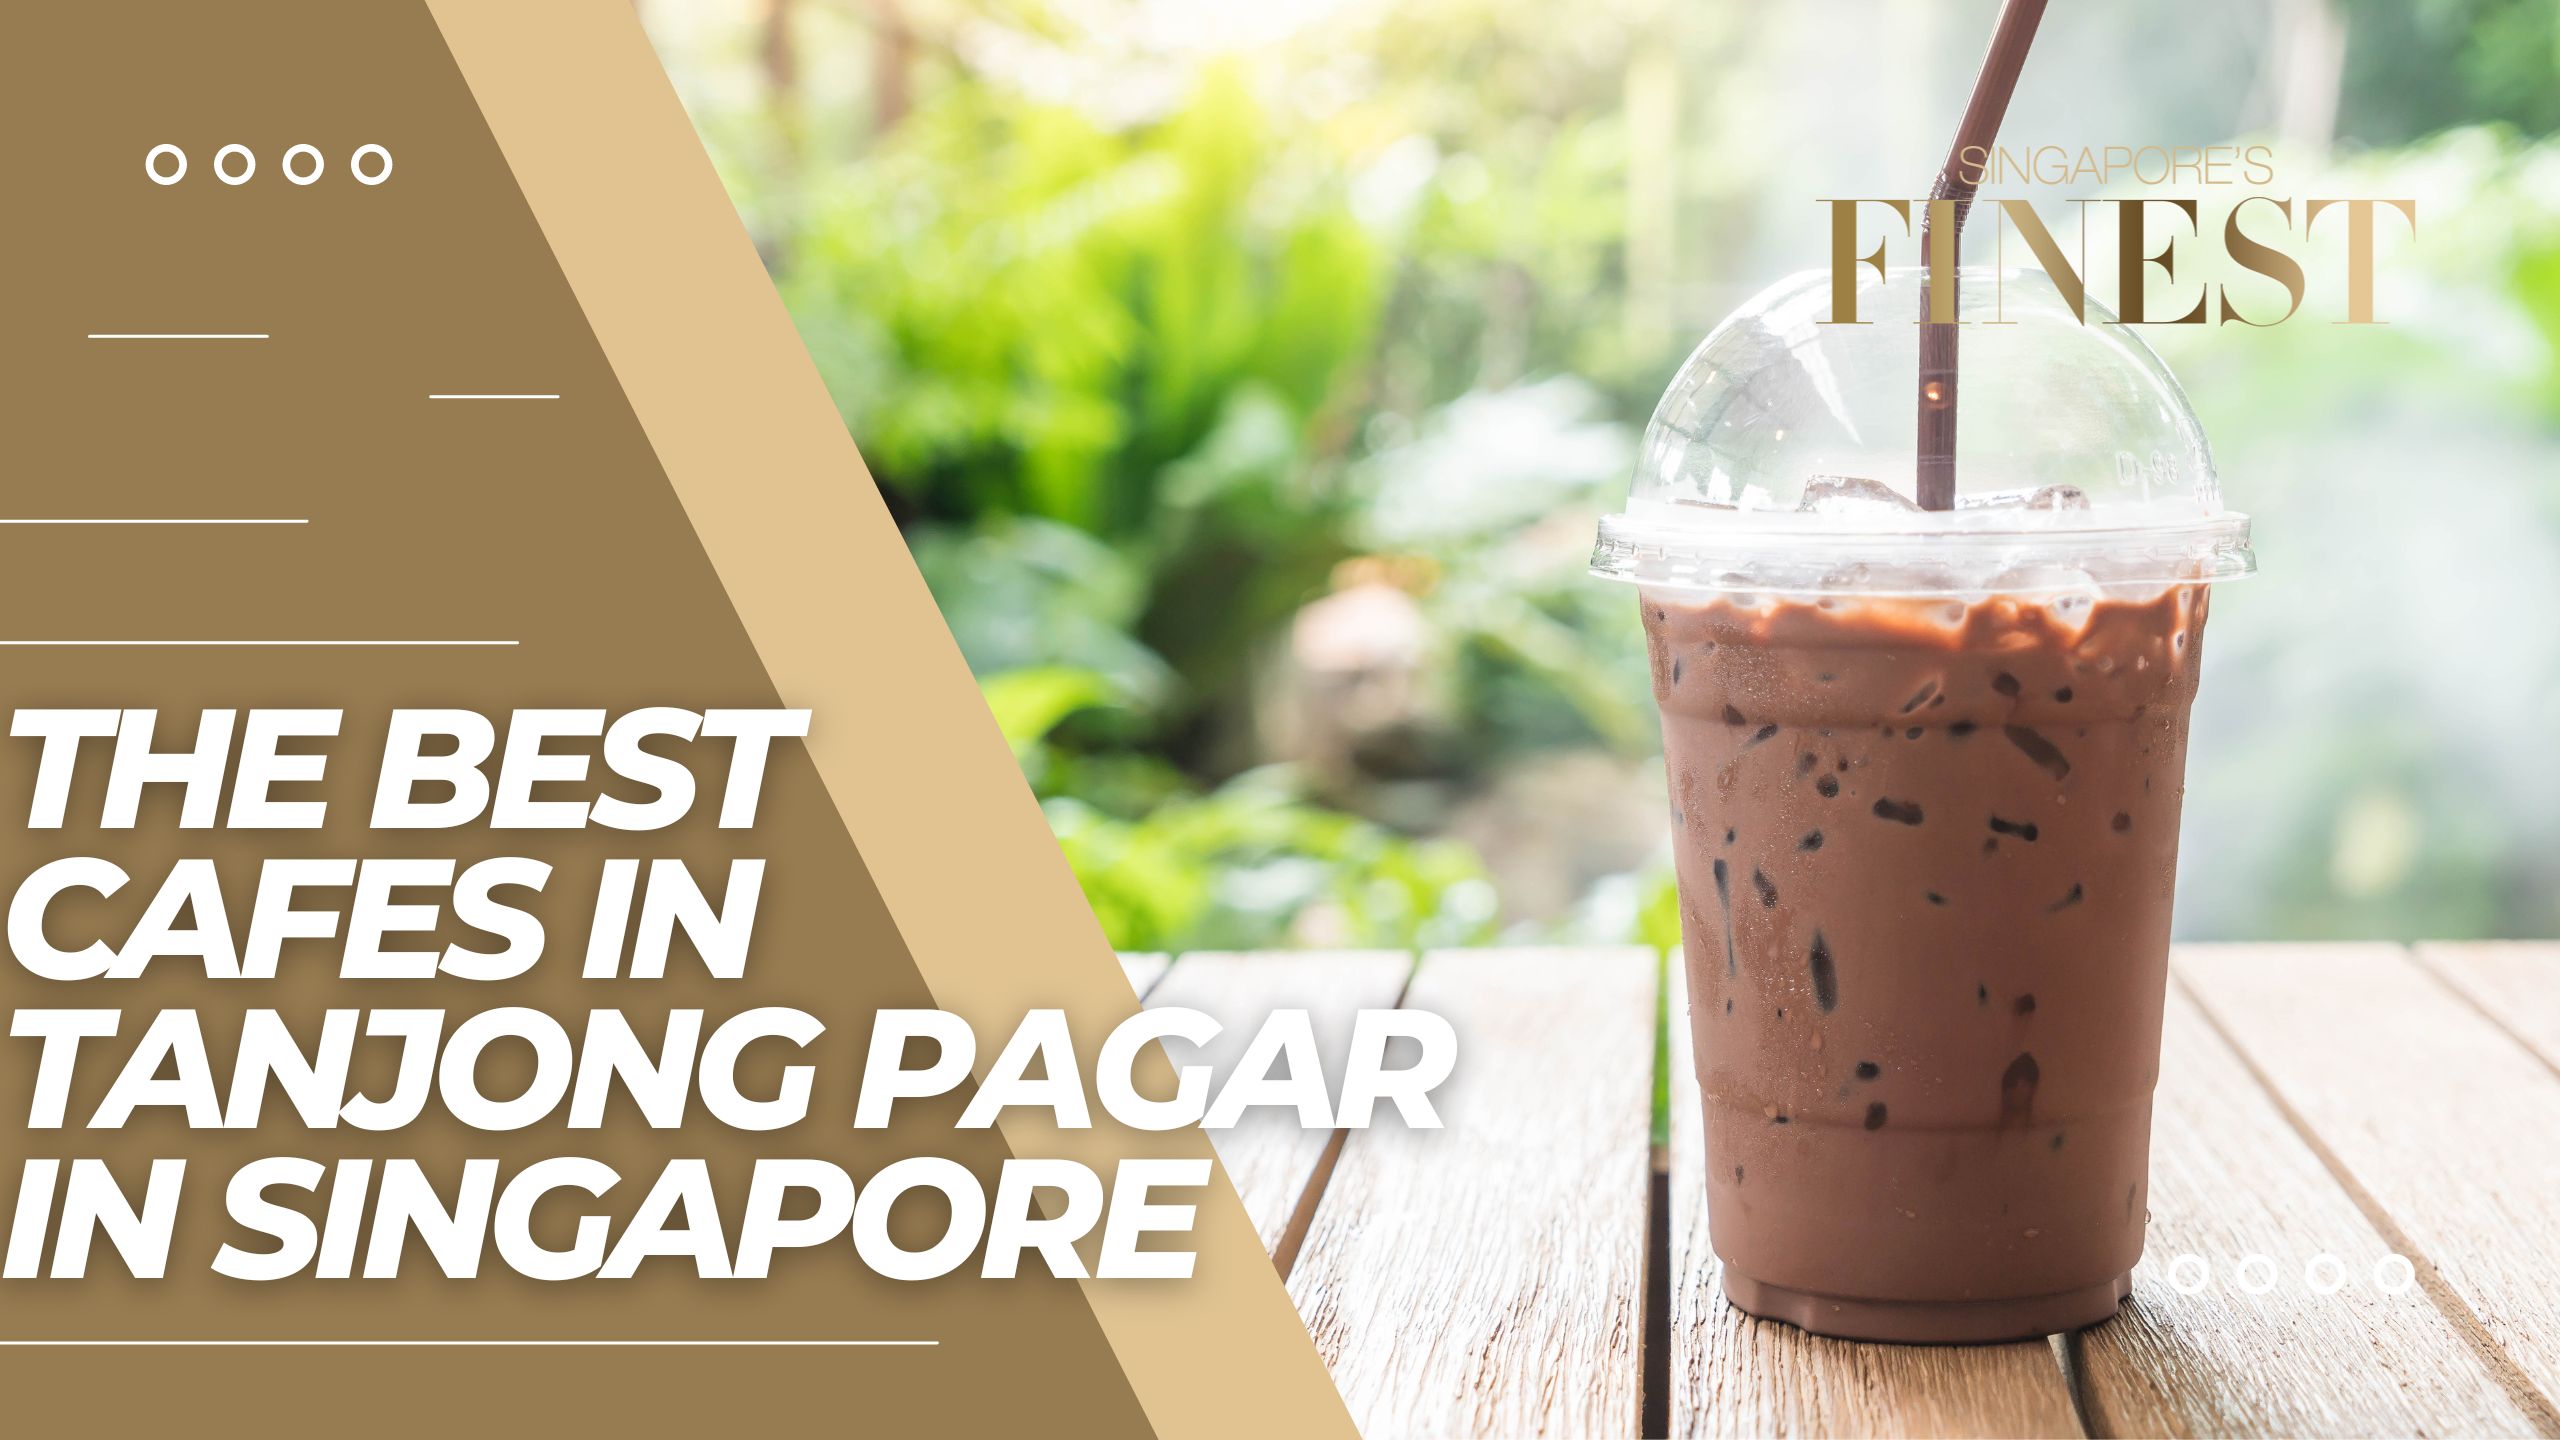 The Finest Cafes in Tanjong Pagar Singapore